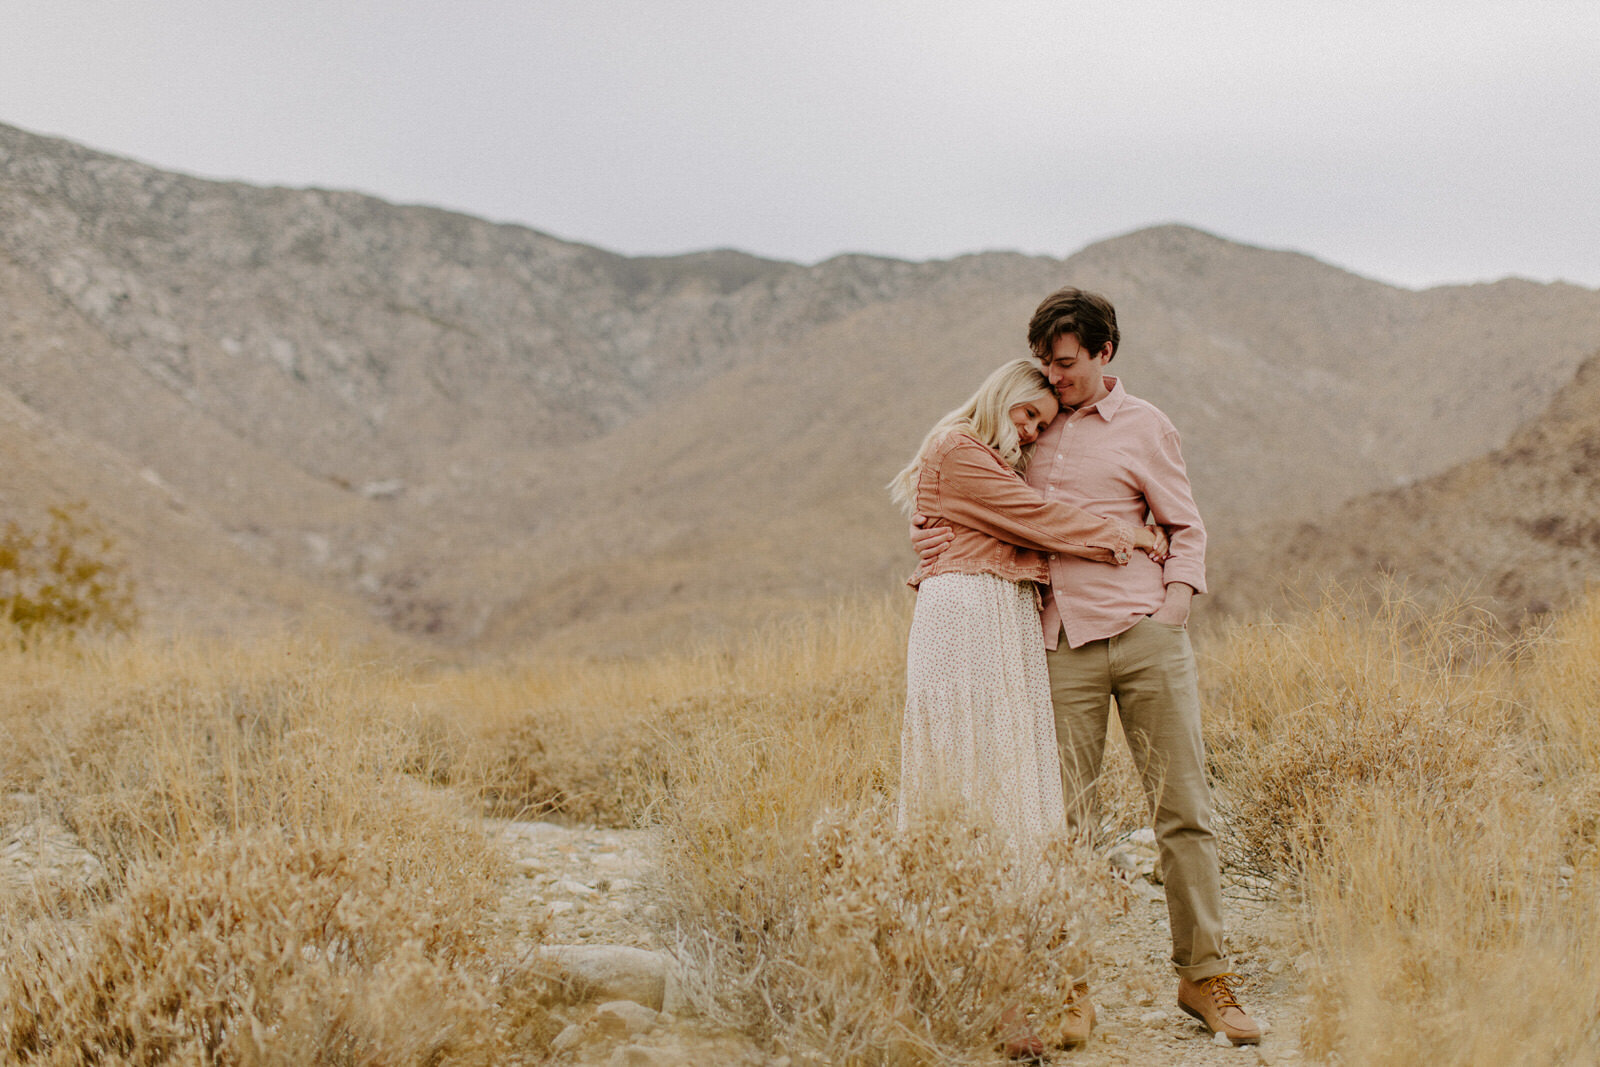 Brianna-Broyles-Photography-Pink-Palm-Springs-Engagement-Session-9.jpg